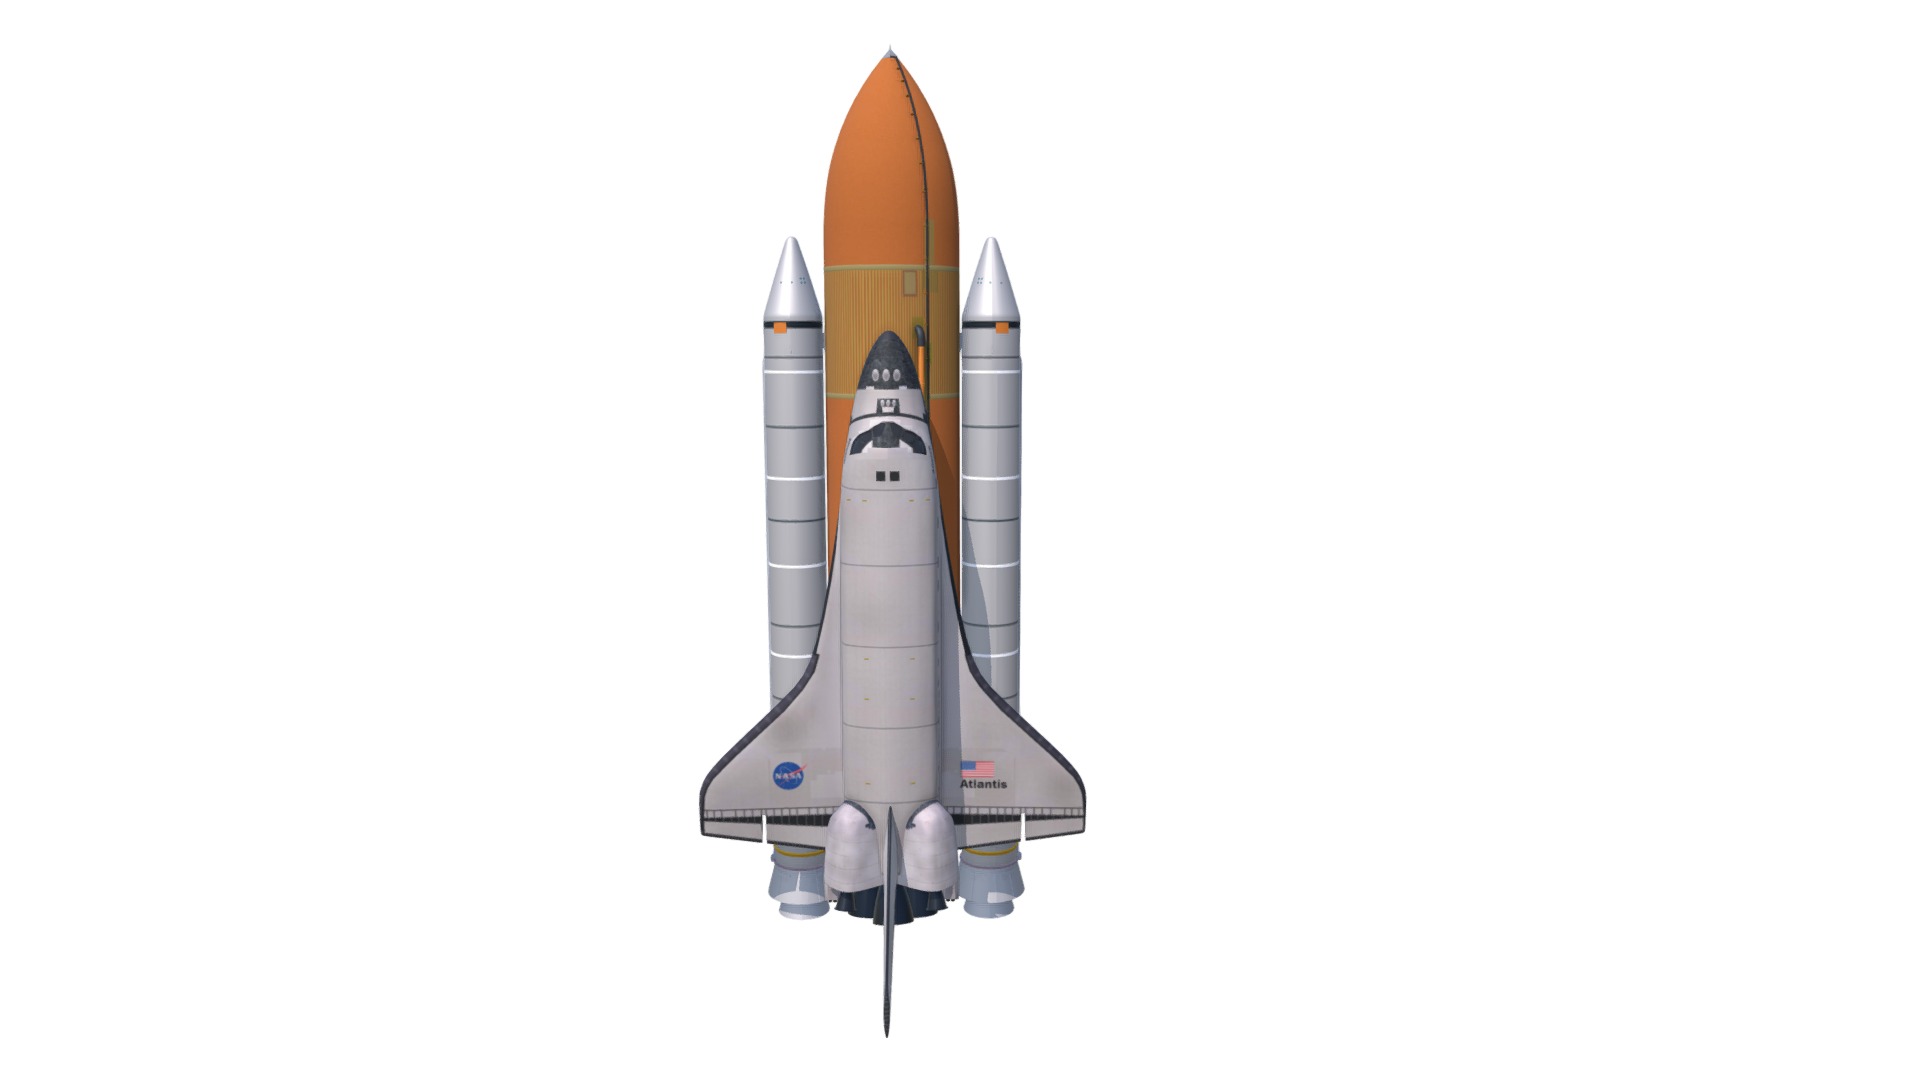 3D model Atlantis Space Shuttle - This is a 3D model of the Atlantis Space Shuttle. The 3D model is about a rocket with a long point.